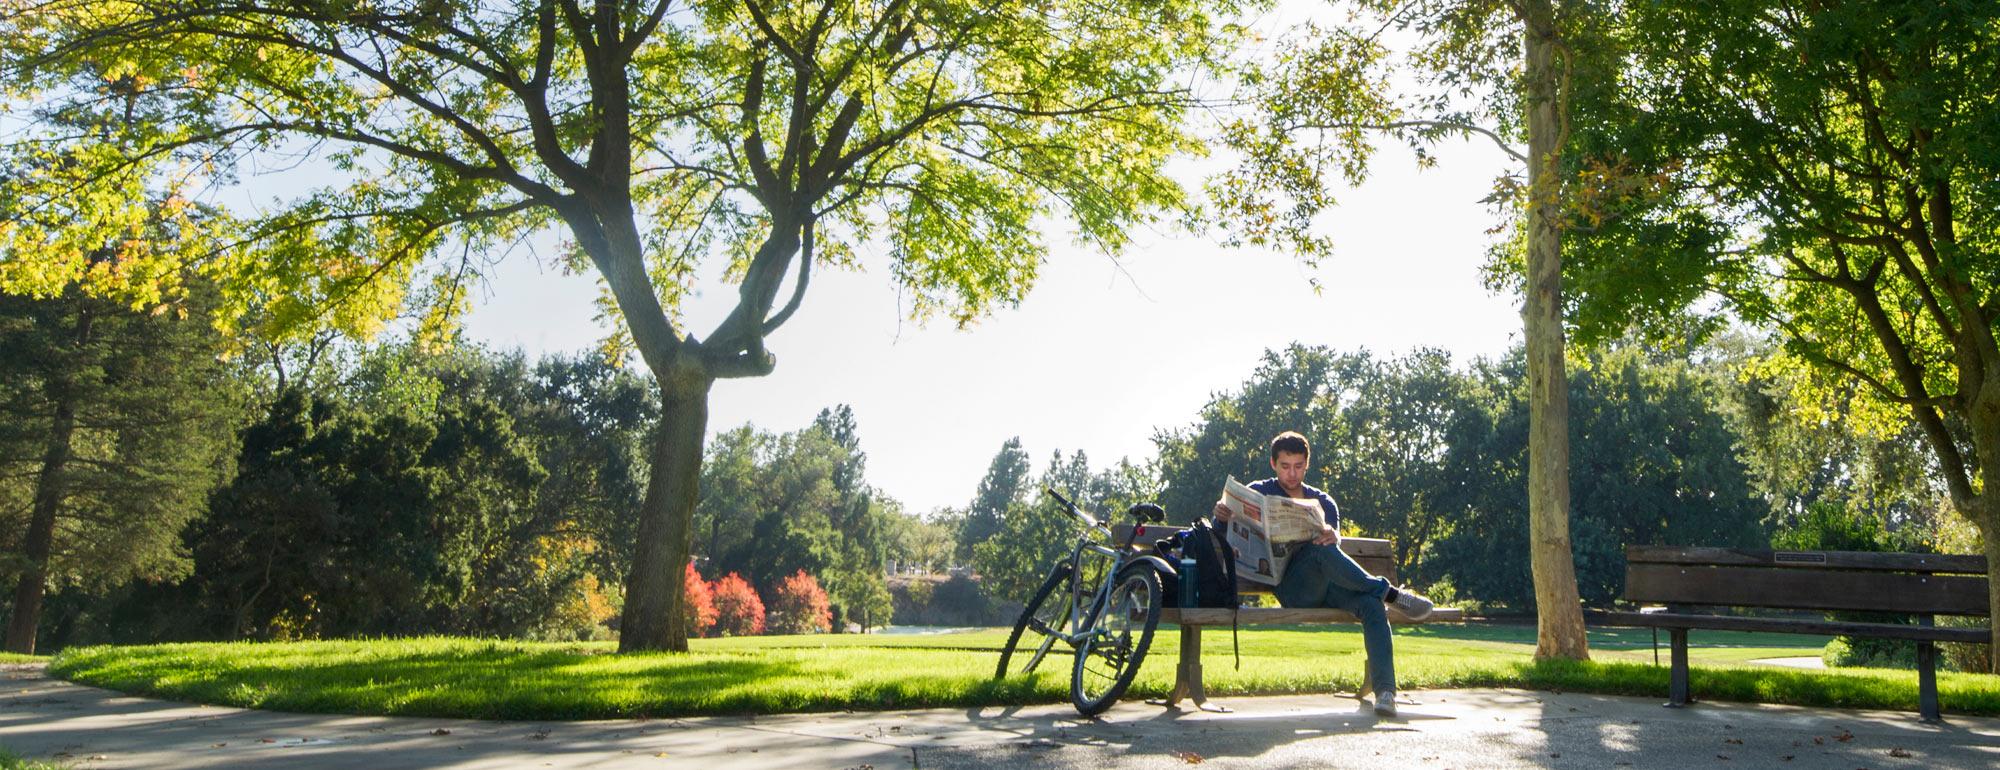 A UC Davis student sits on a bench reading a newspaper next to his bike in front of the beautiful trees of the UC Davis arboretum